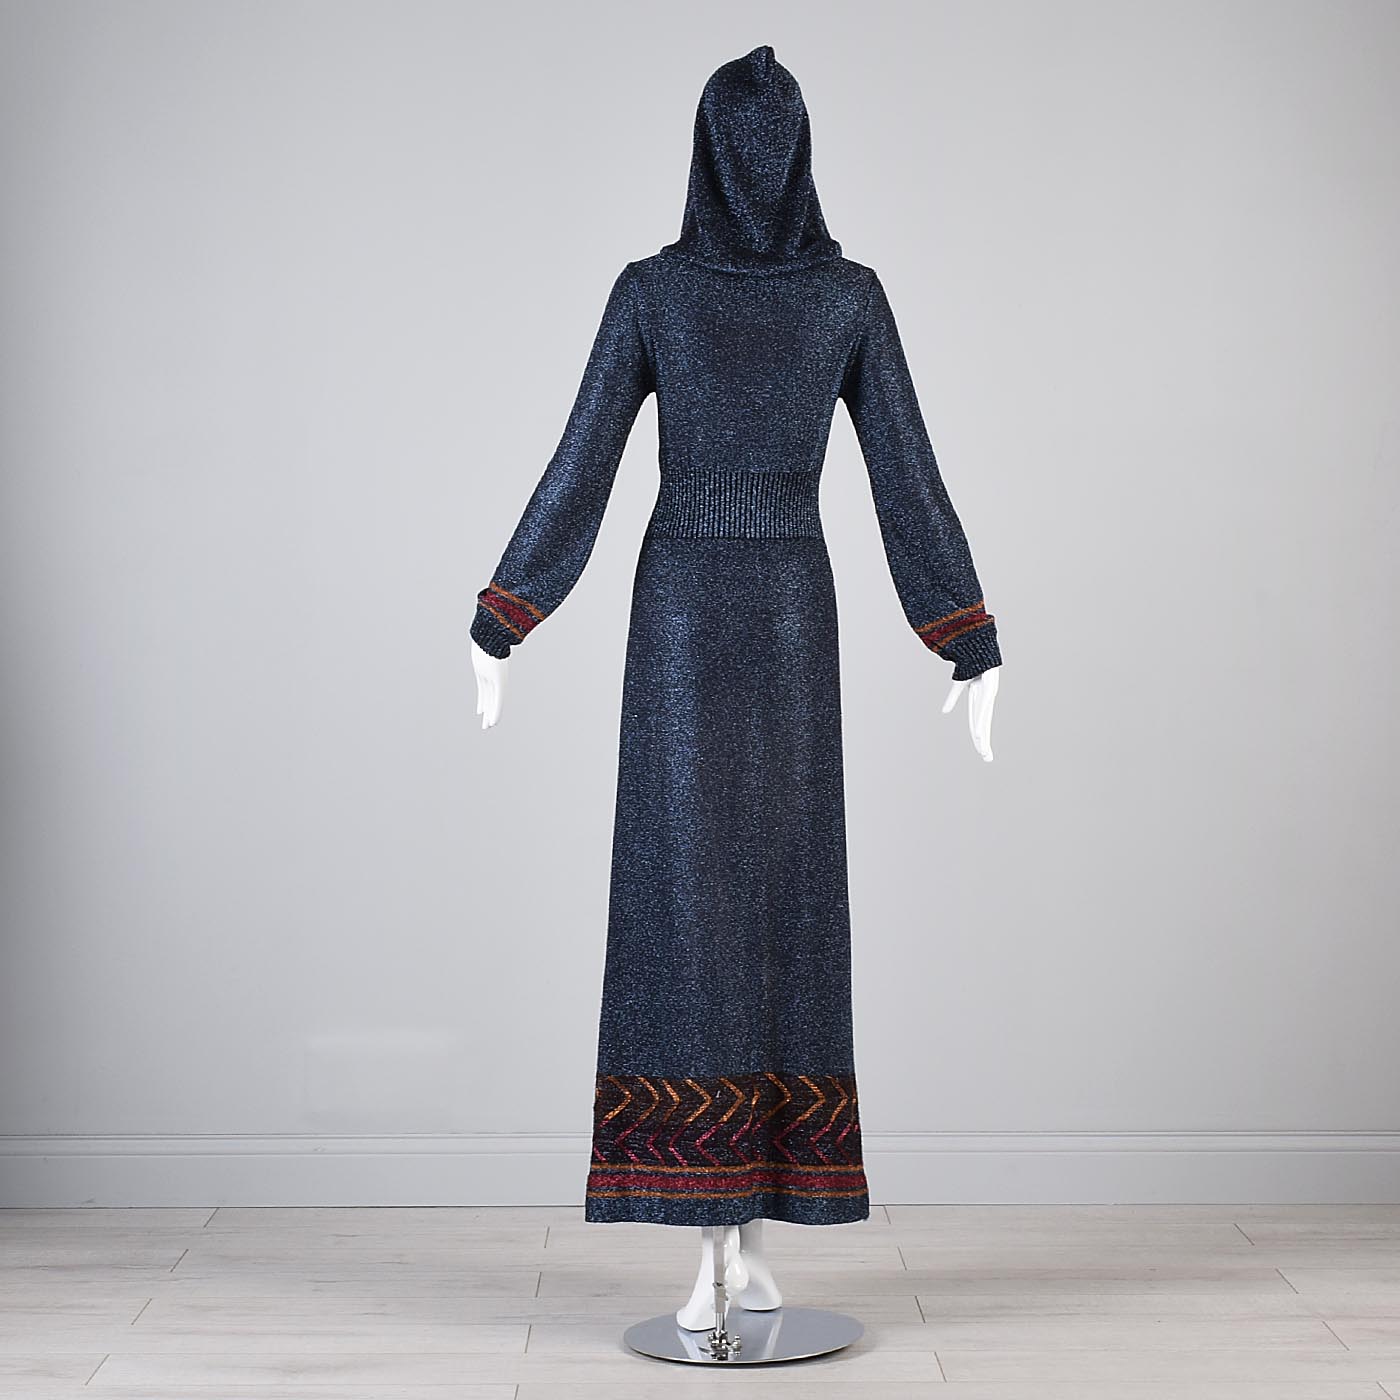 1970s Iconic Hooded Maxi Dress in Metallic Blue Knit